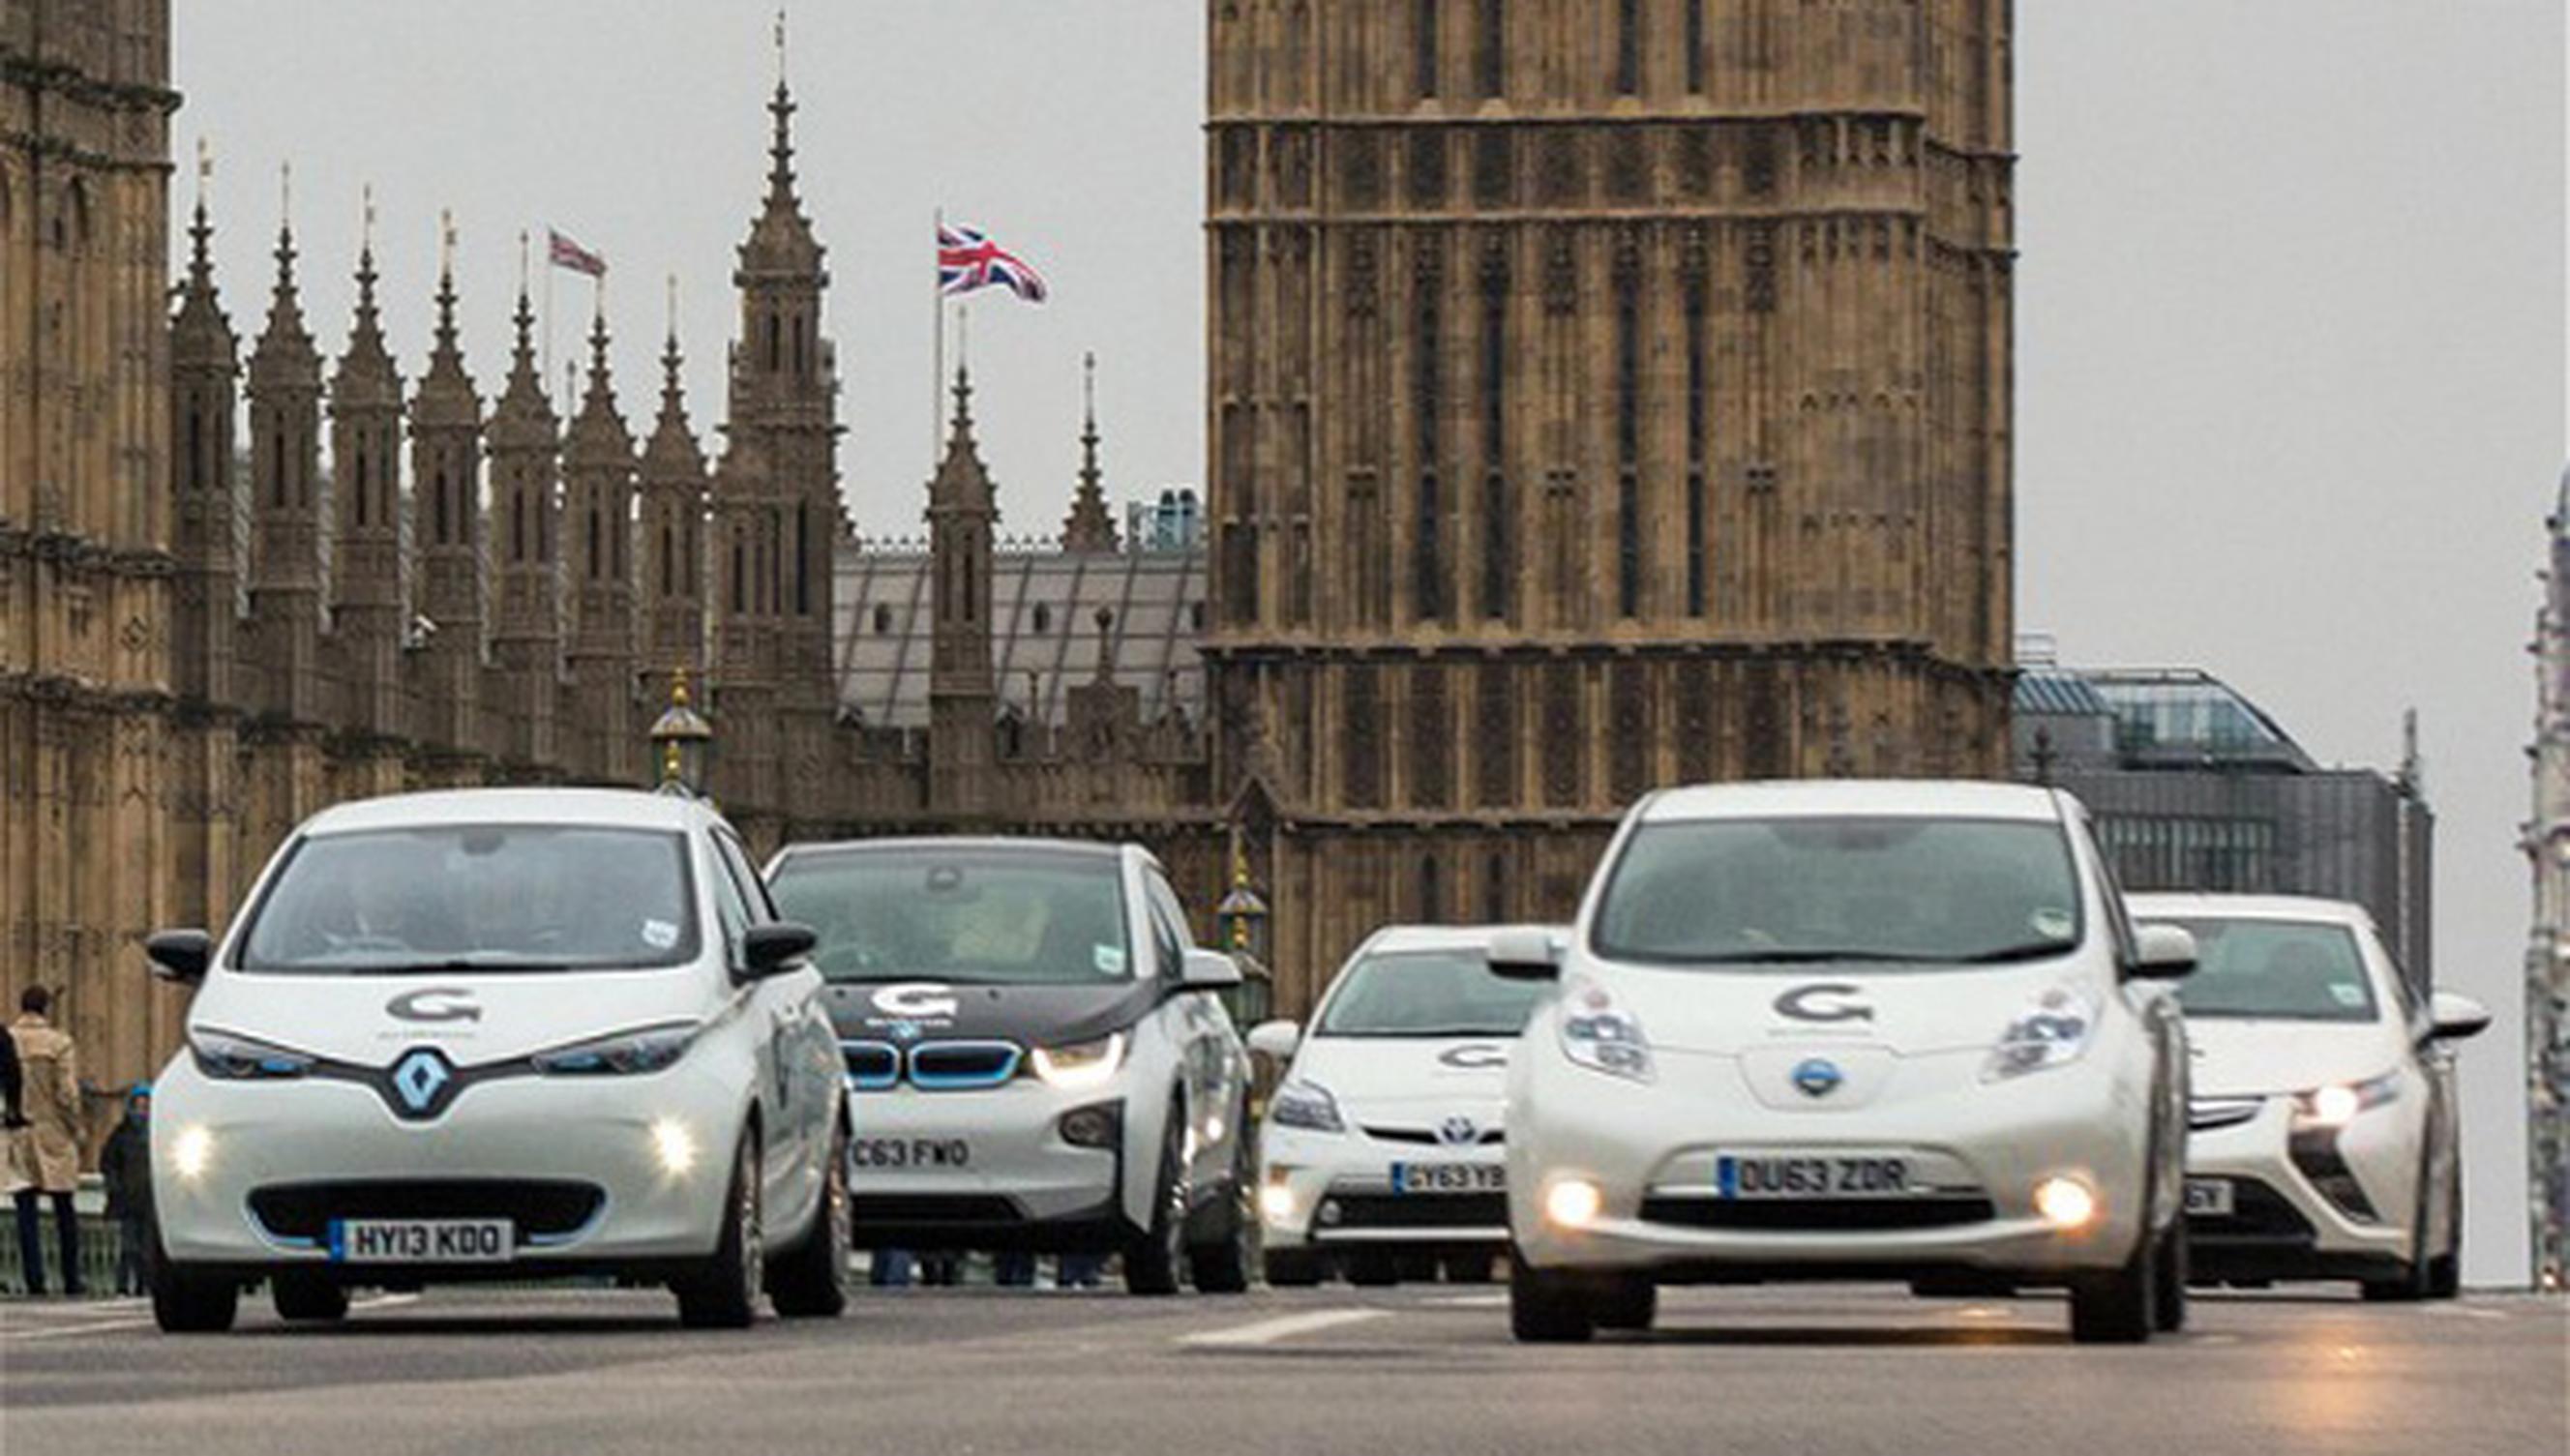 Ultra-low emission vehicle manufacturers will receive additional Government support.